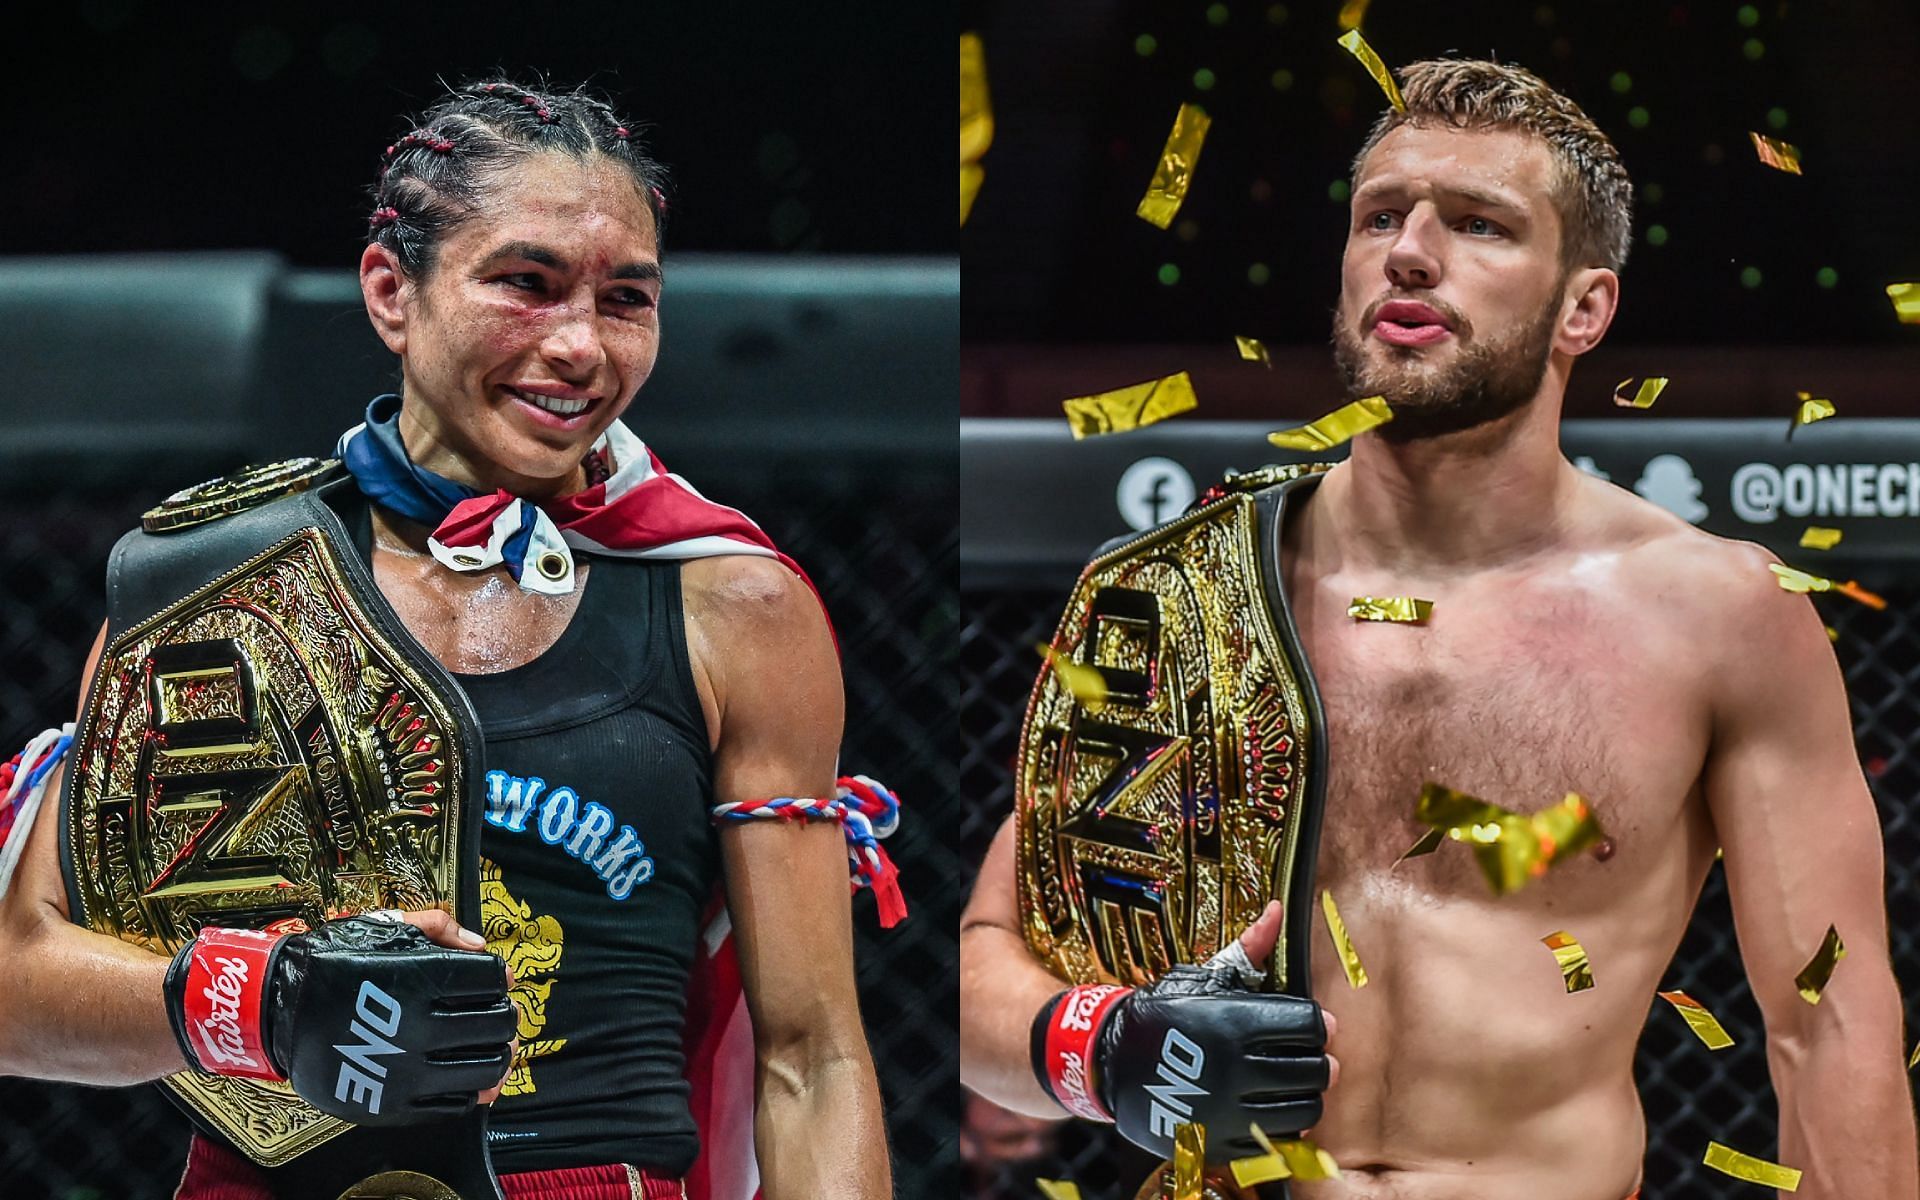 Janet Todd (left) and Reinier de Ridder (right) [Photos ONE Championship]